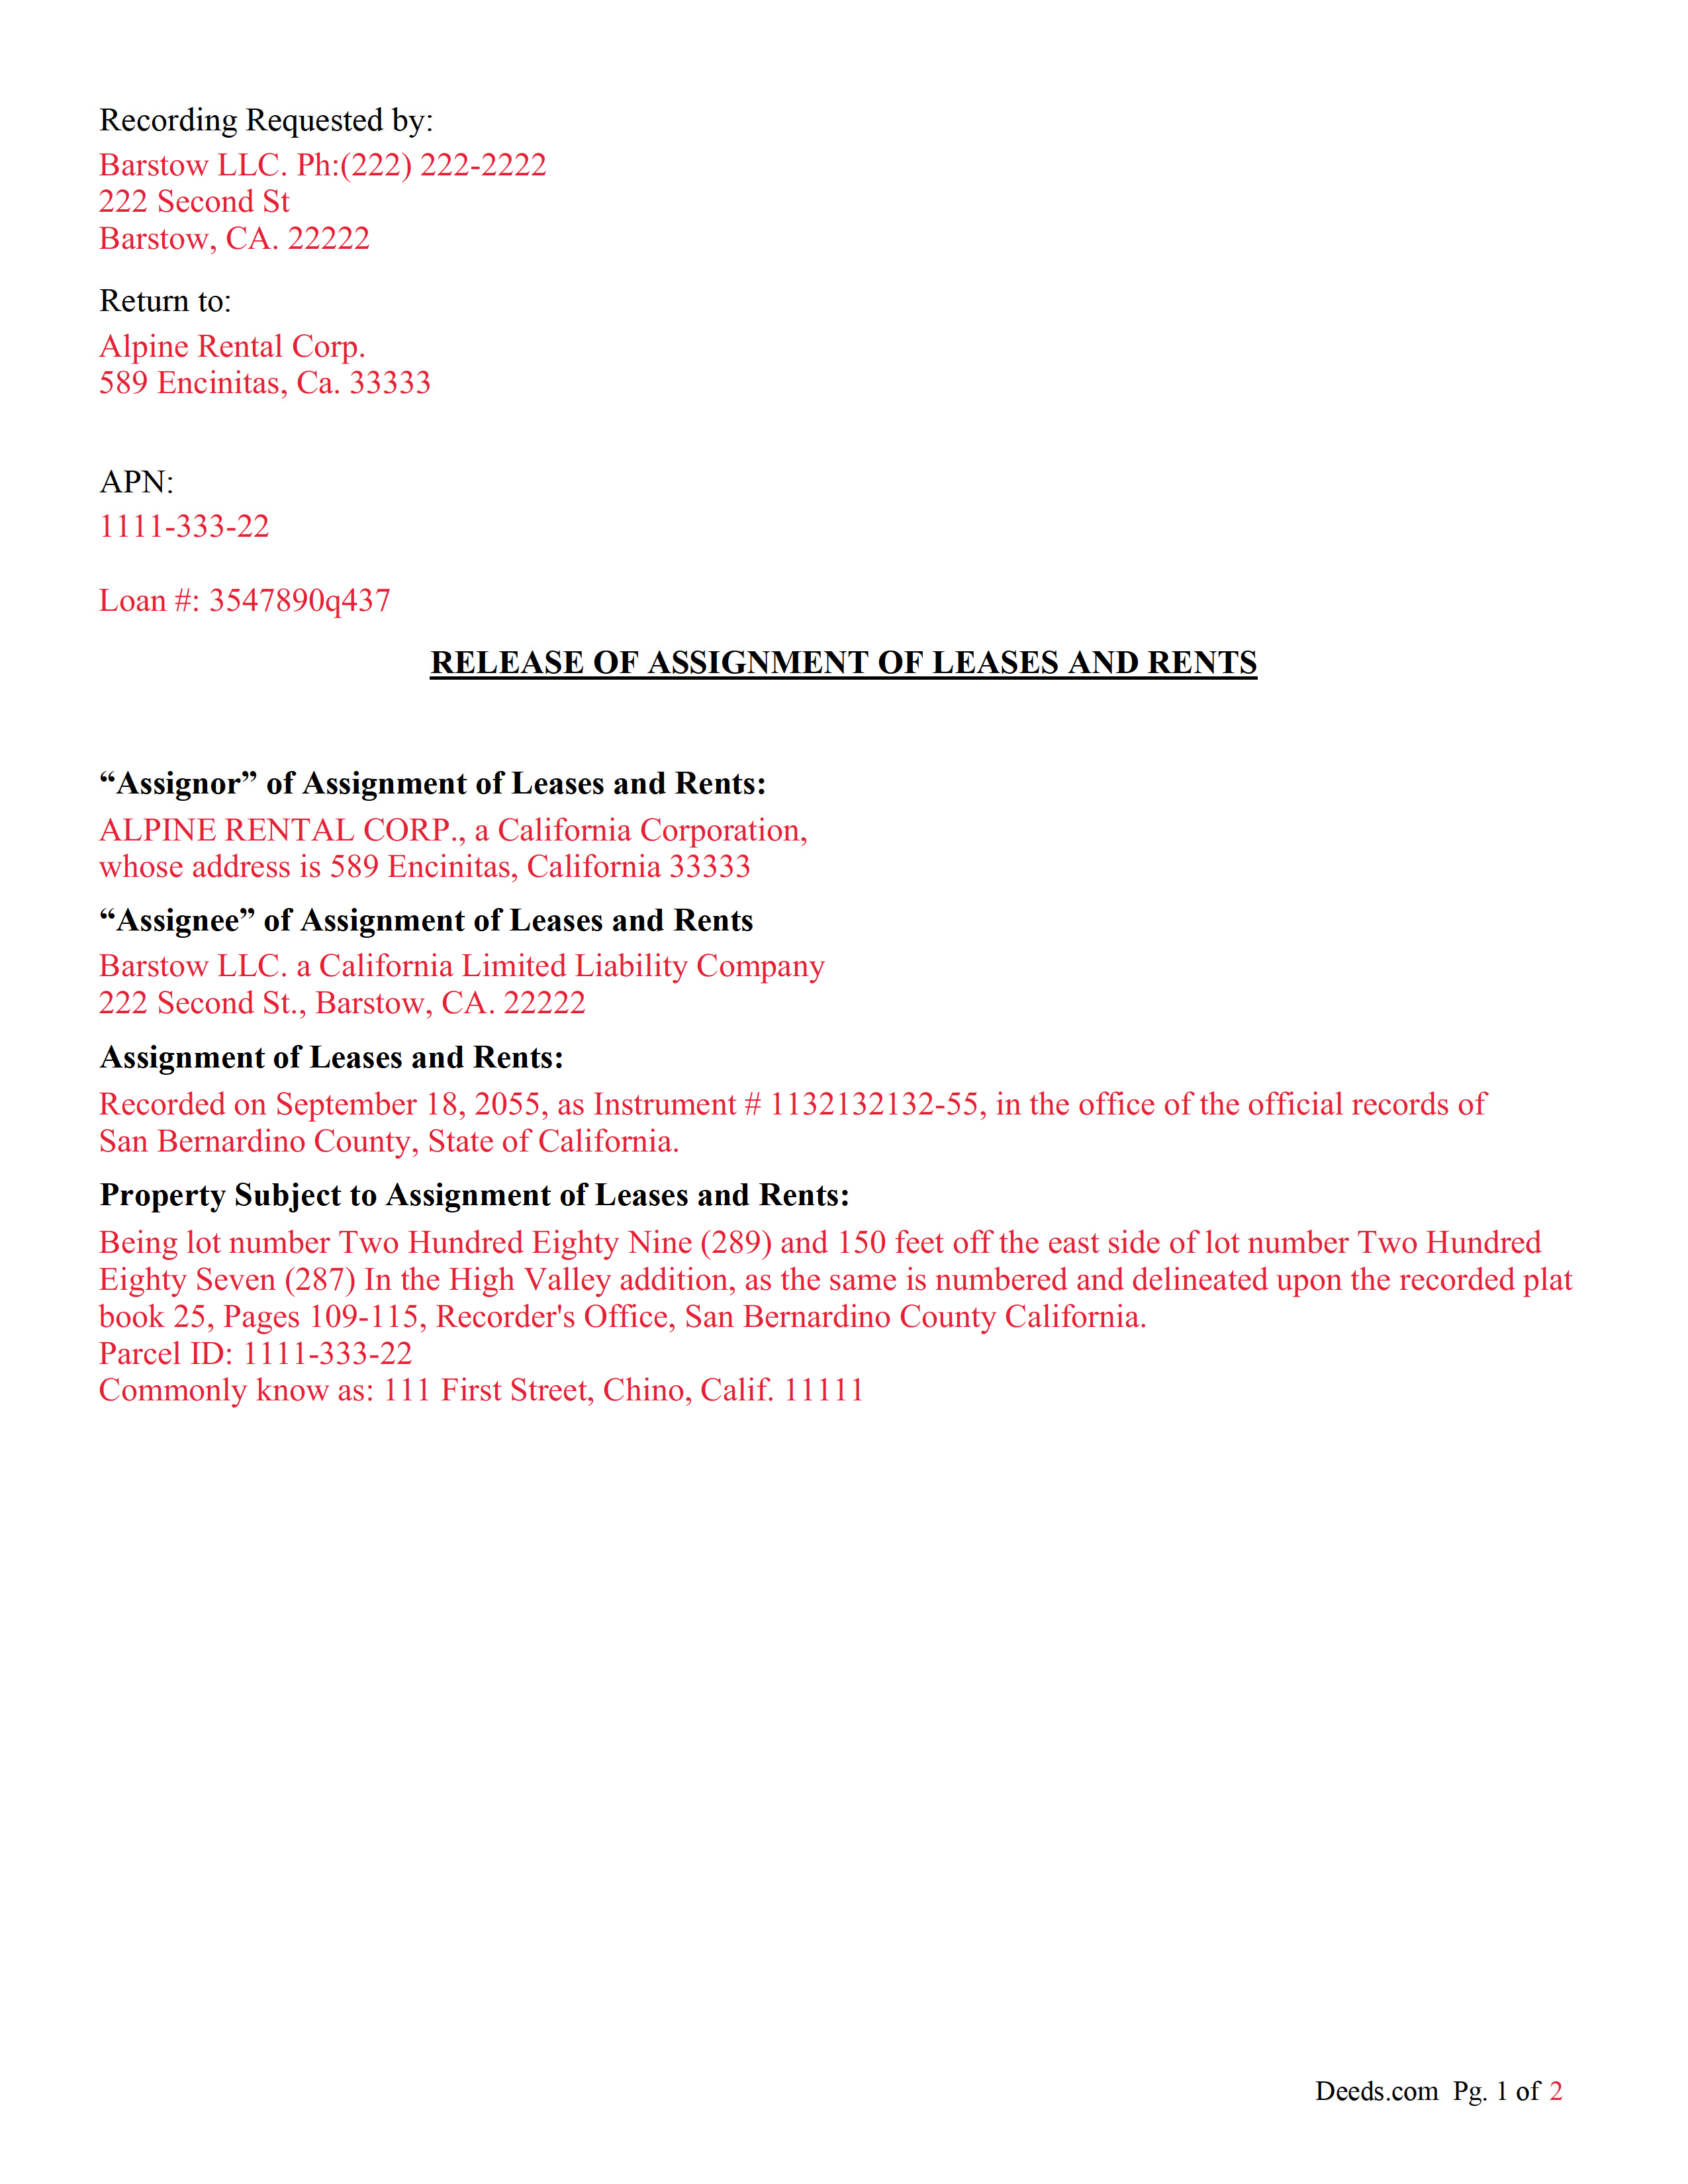 Completed Example of a Release of Assignment of Leases and Rents Document